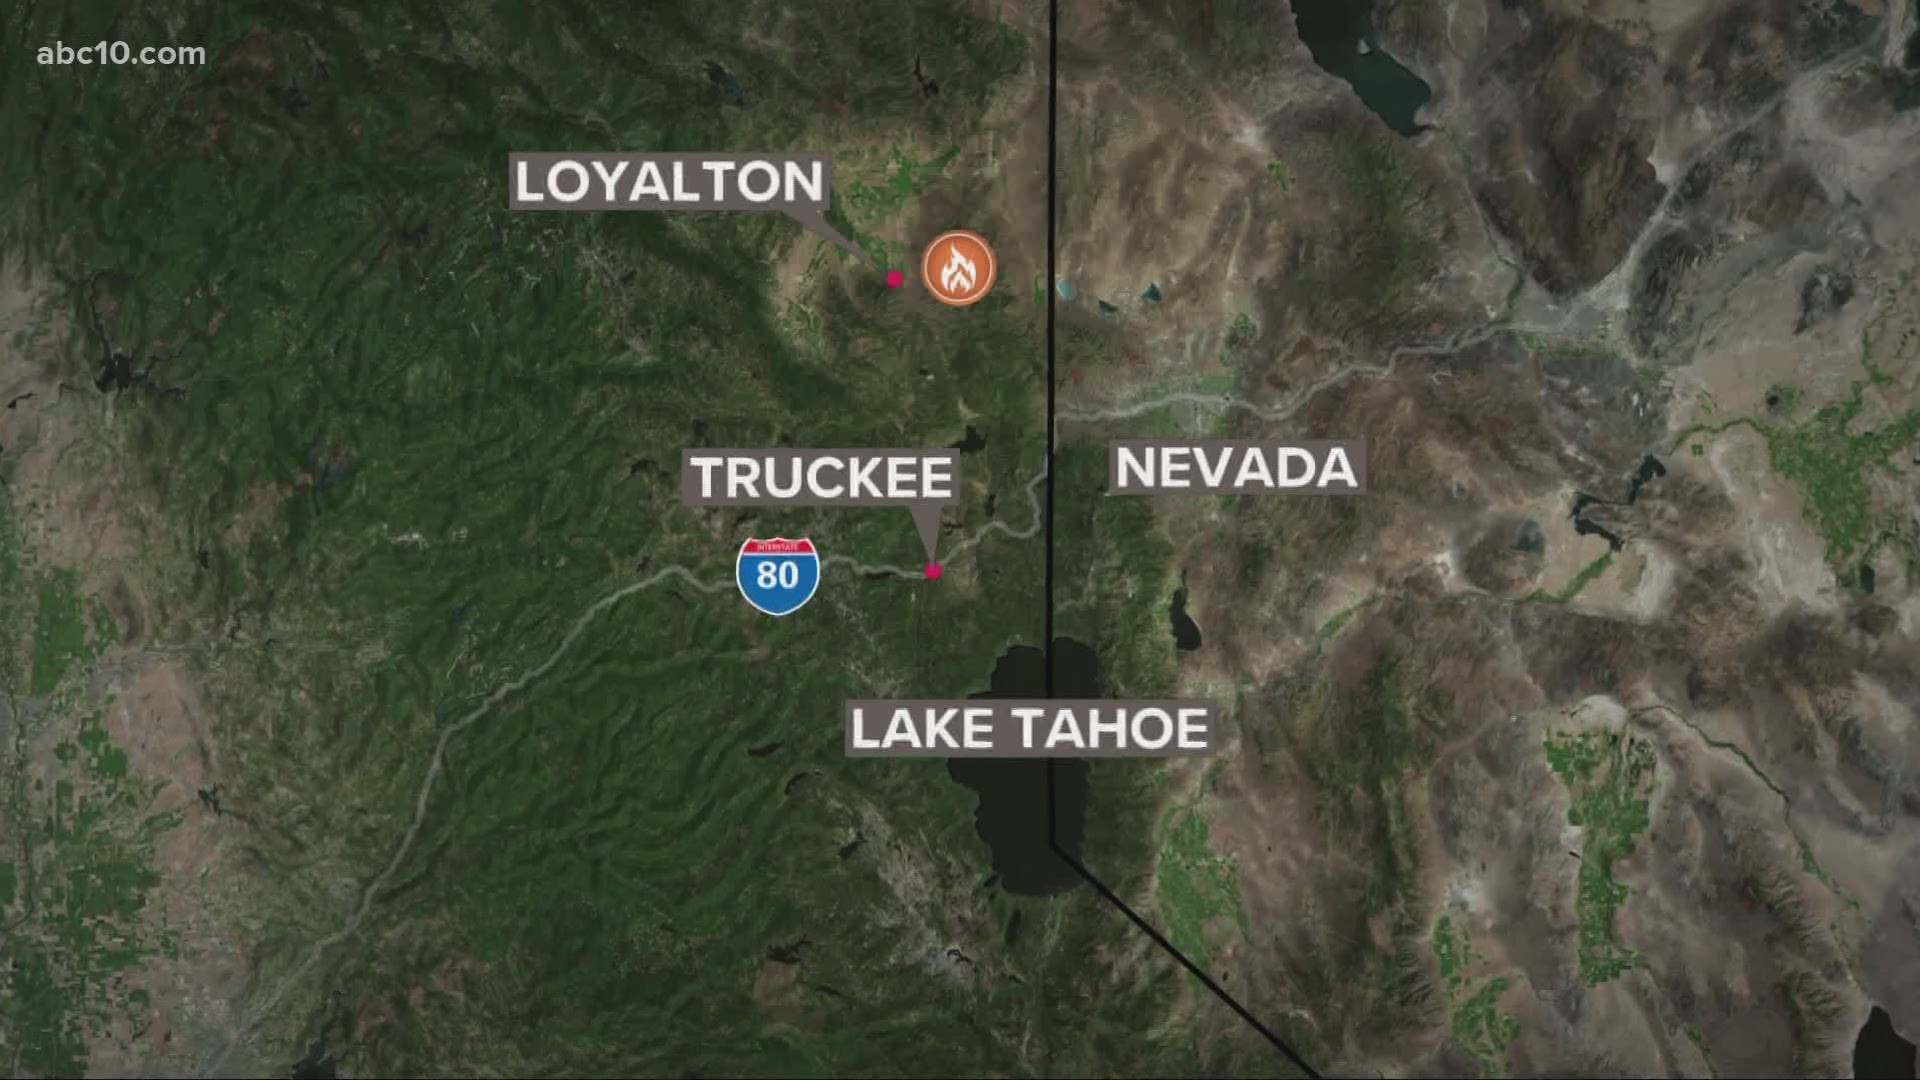 The so-called Loyalton Fire started east of Loyalton, CA and is burning north and east next to the areas of Beckworth Pass and Hallelujah Junction.